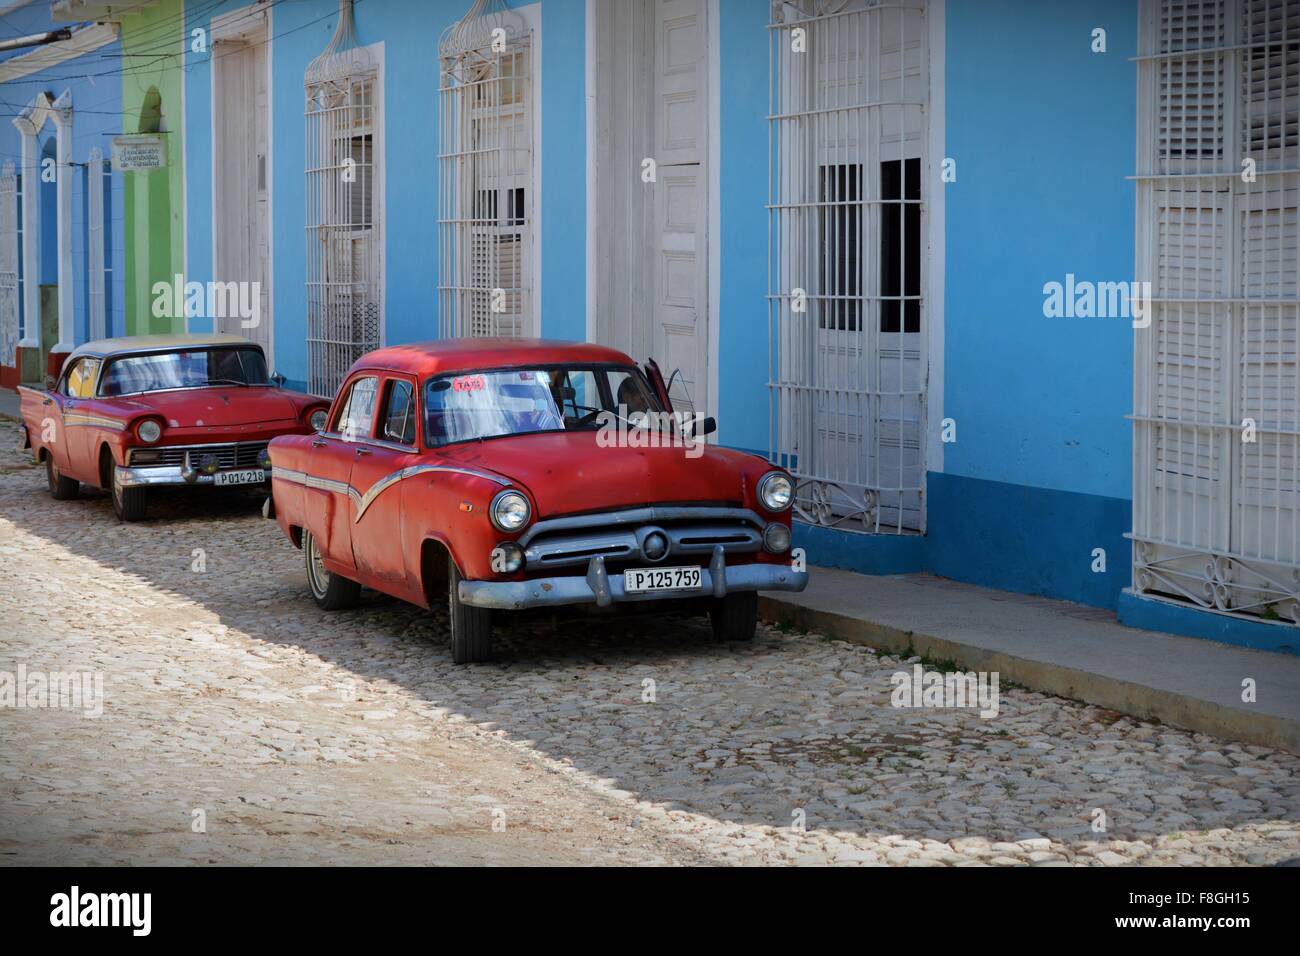 two red vintage cars parked up in the shade on a cobbled street lined with pastel colored buildings in Trinidad Cuba Stock Photo